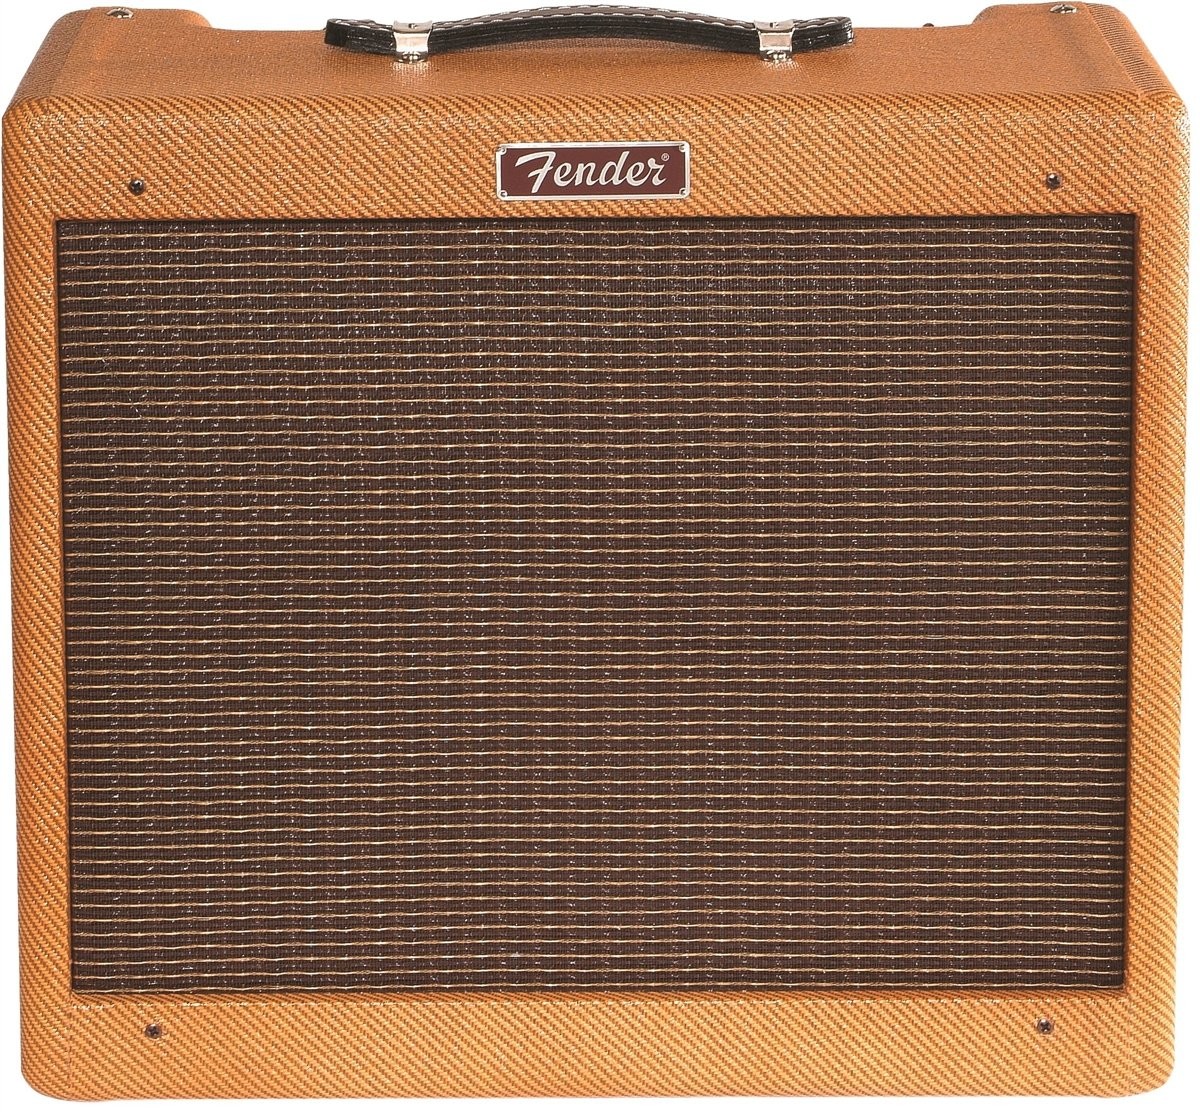 Fender Blues Junior Lacquered Tweed combo